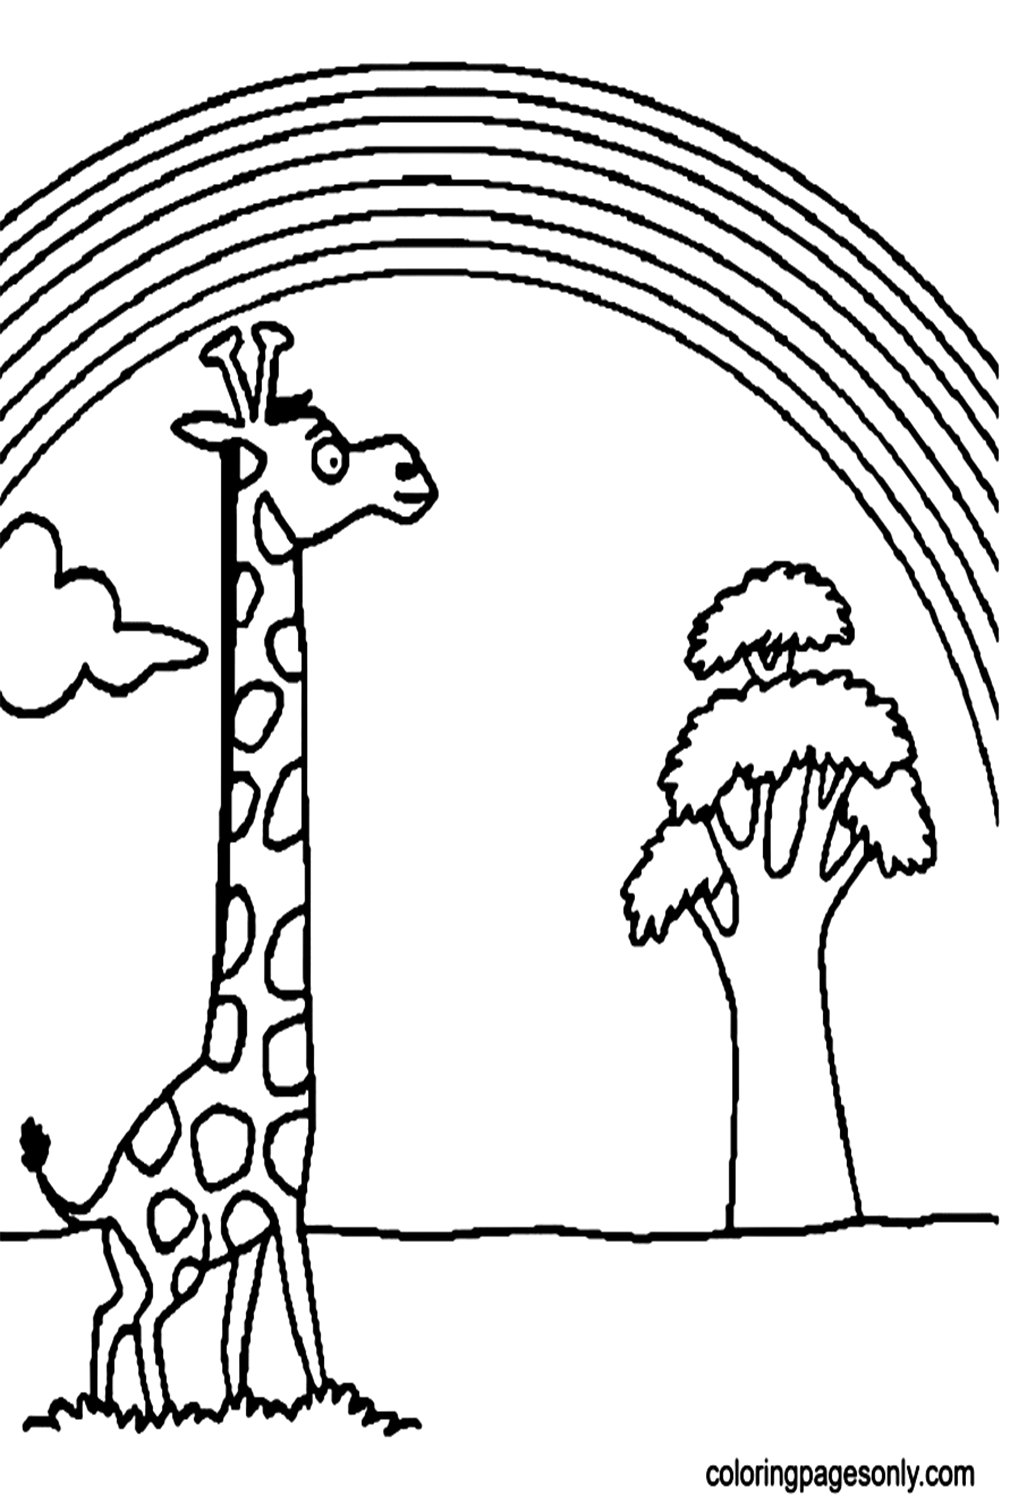 Giraffe Is Looking At The Rainbow Coloring Pages